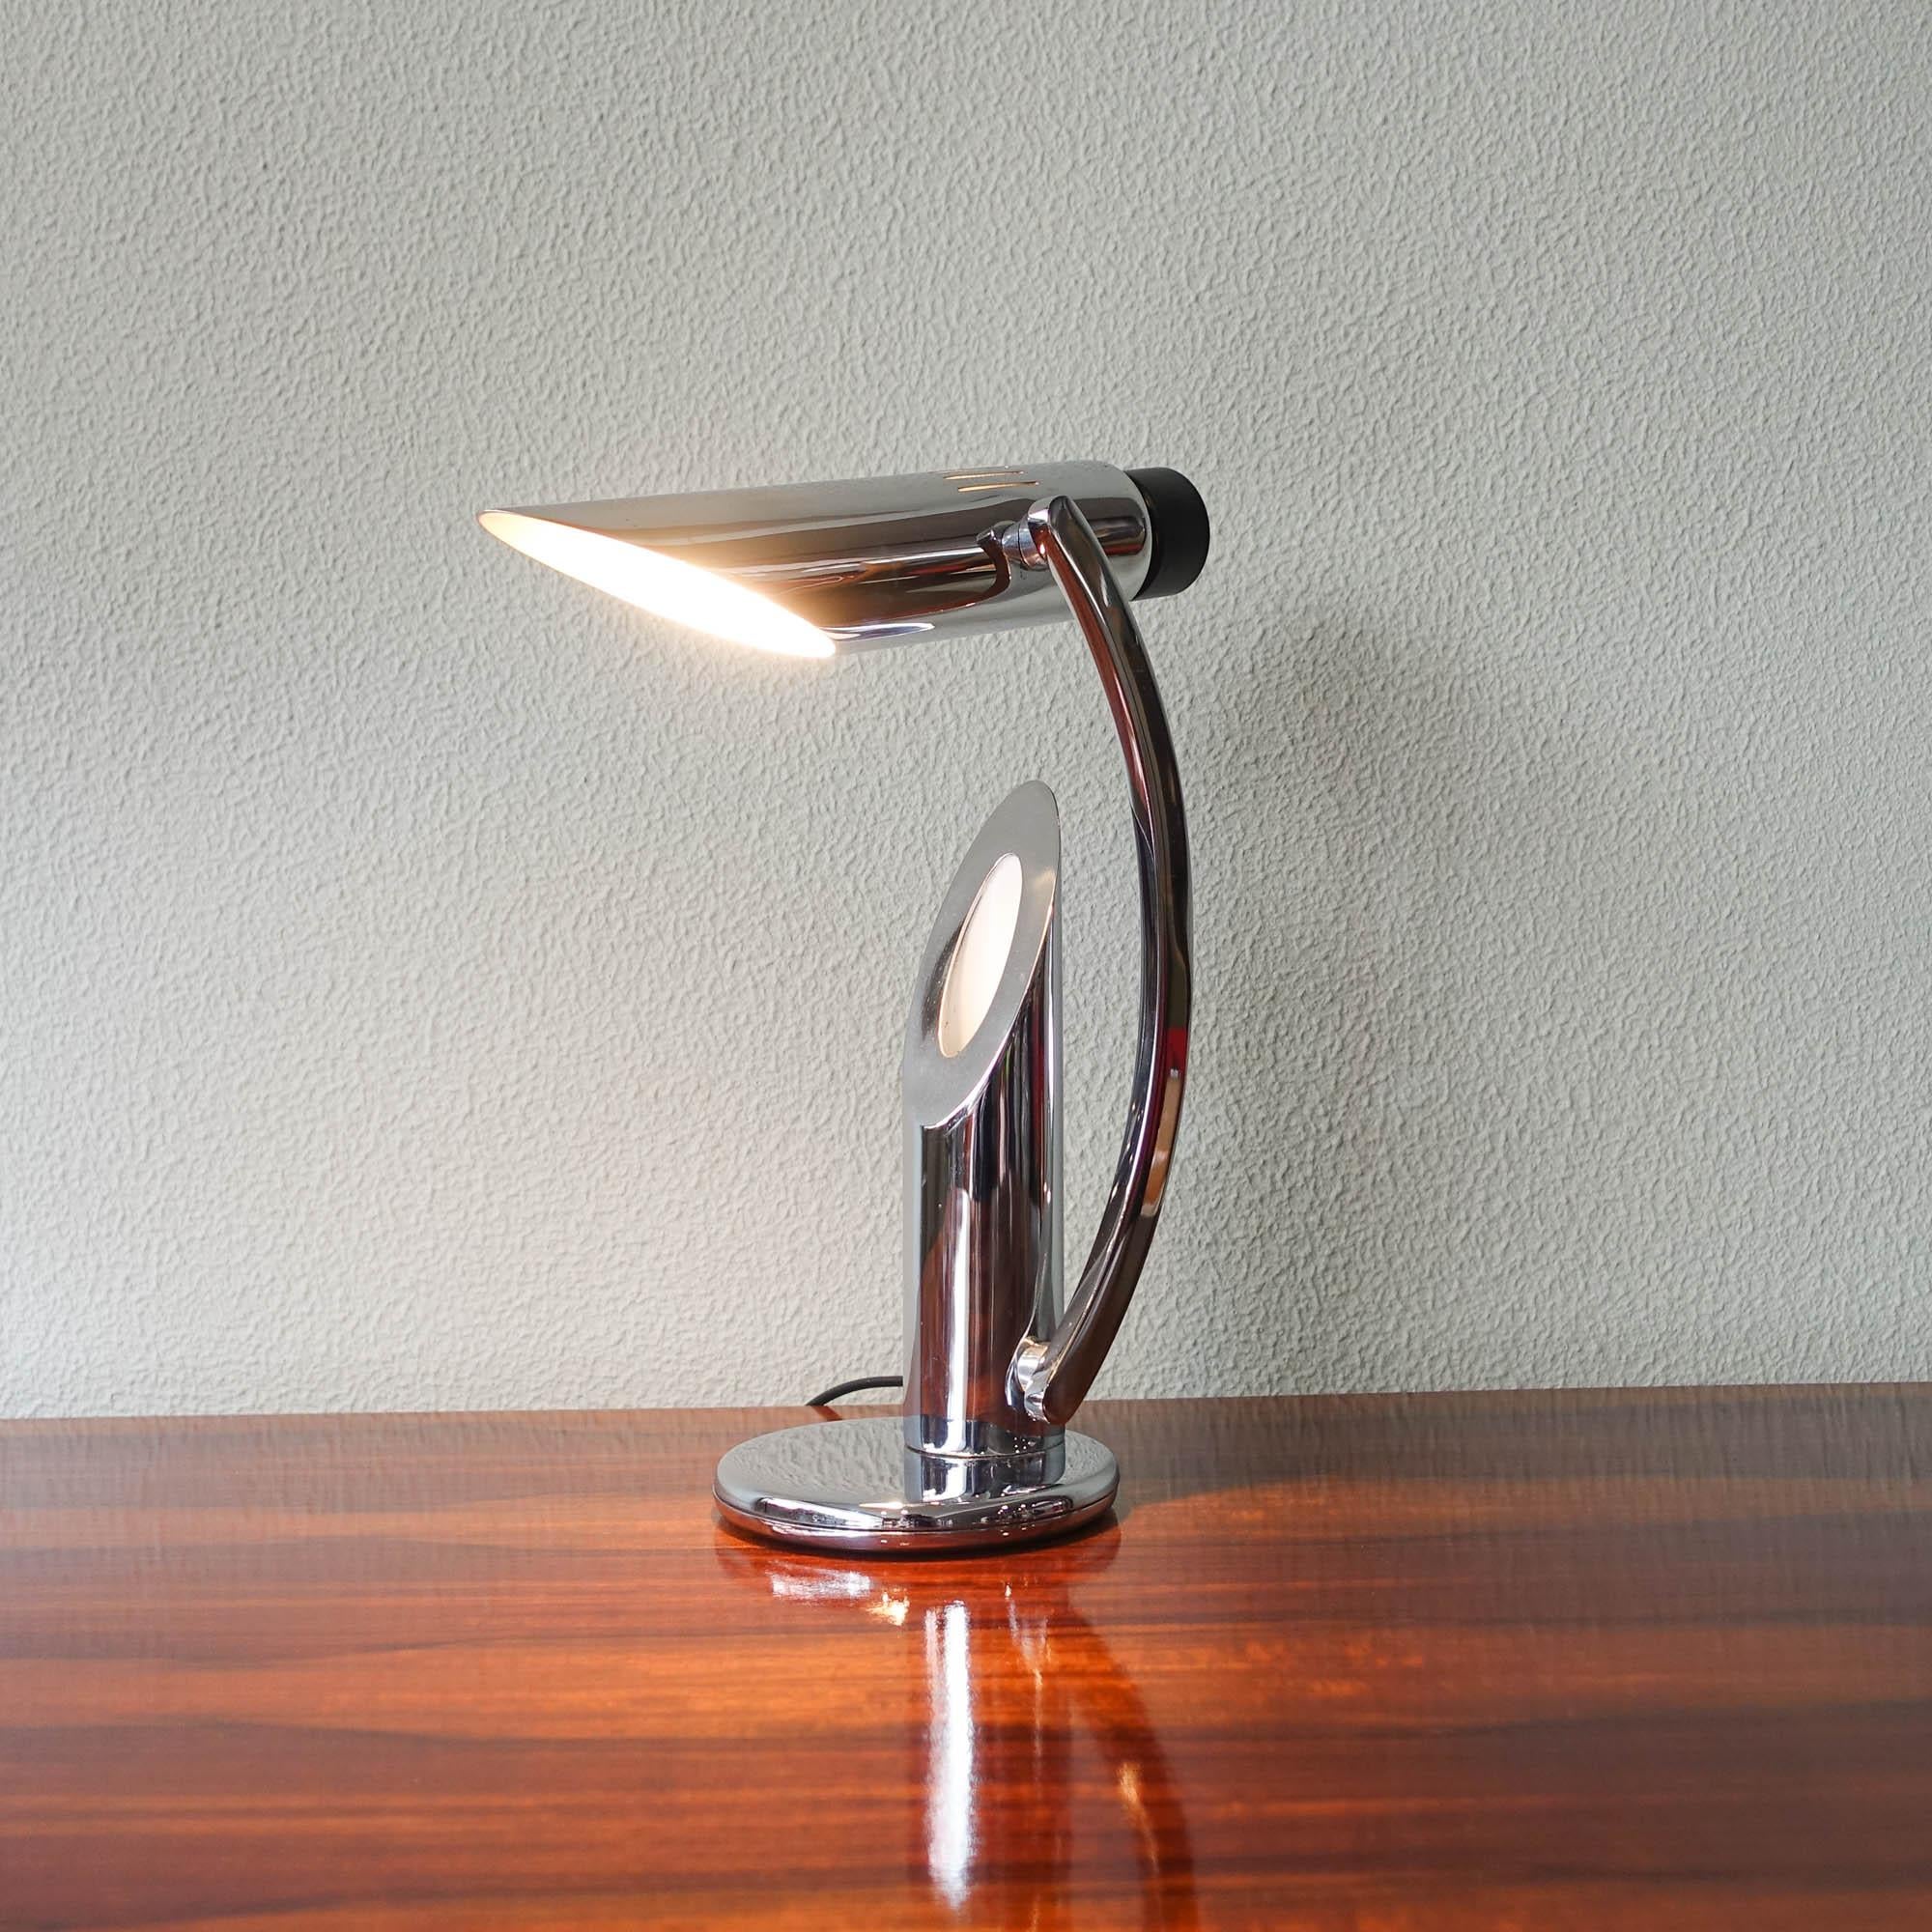 Spanish Tharsis Foldable Chrome Table Lamp from Fase by Luis Perez de la Oliva, 1973